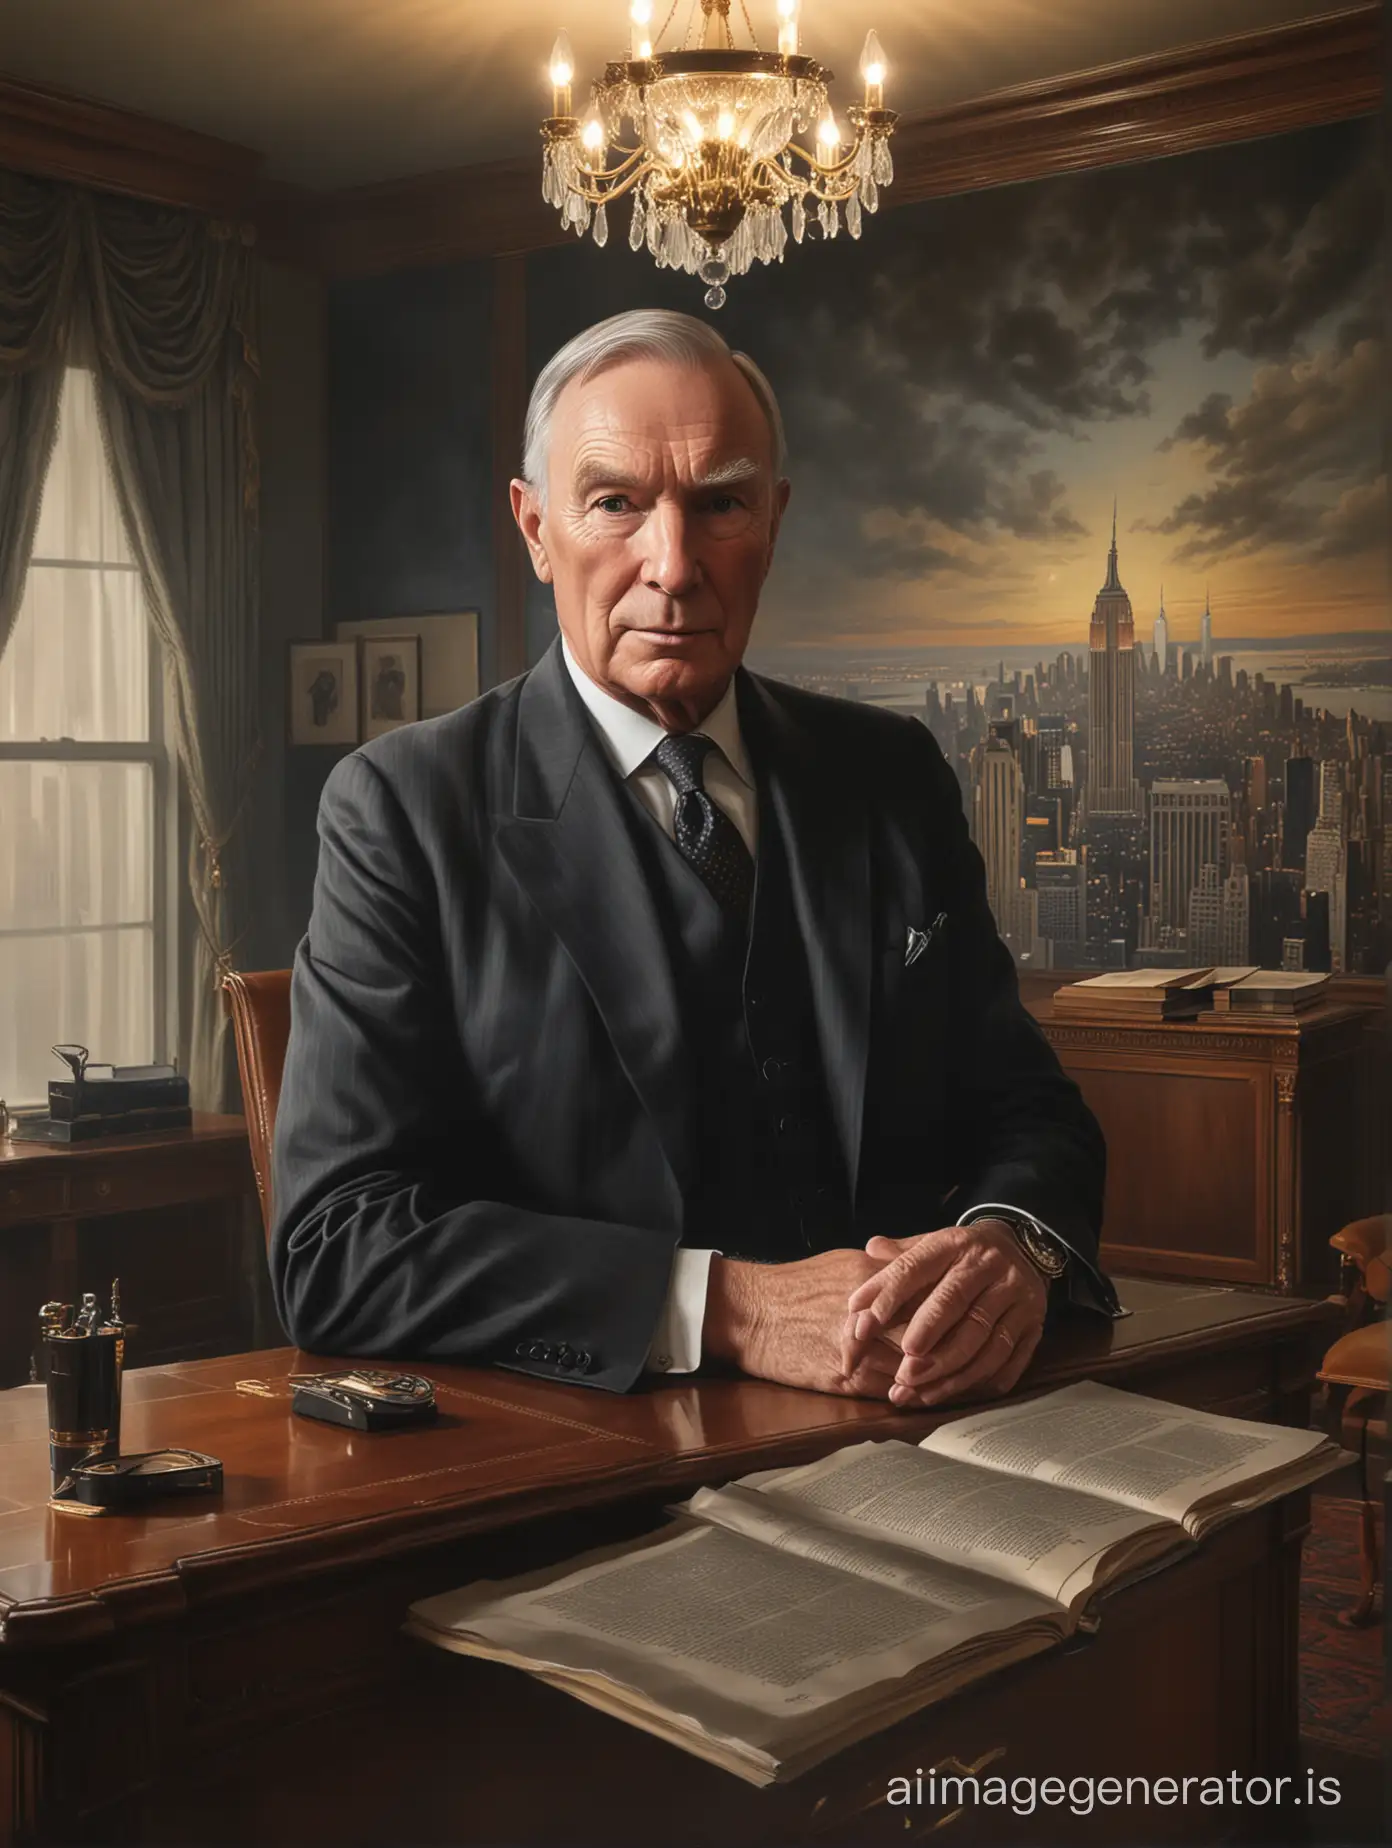 A highly realistic mural capturing John D Rockefeller in an elegant, dimly lit study, in mid-conversation, with the ambiance of the room reflecting a sense of future possibilities, hyper realistic, ultra realistic details